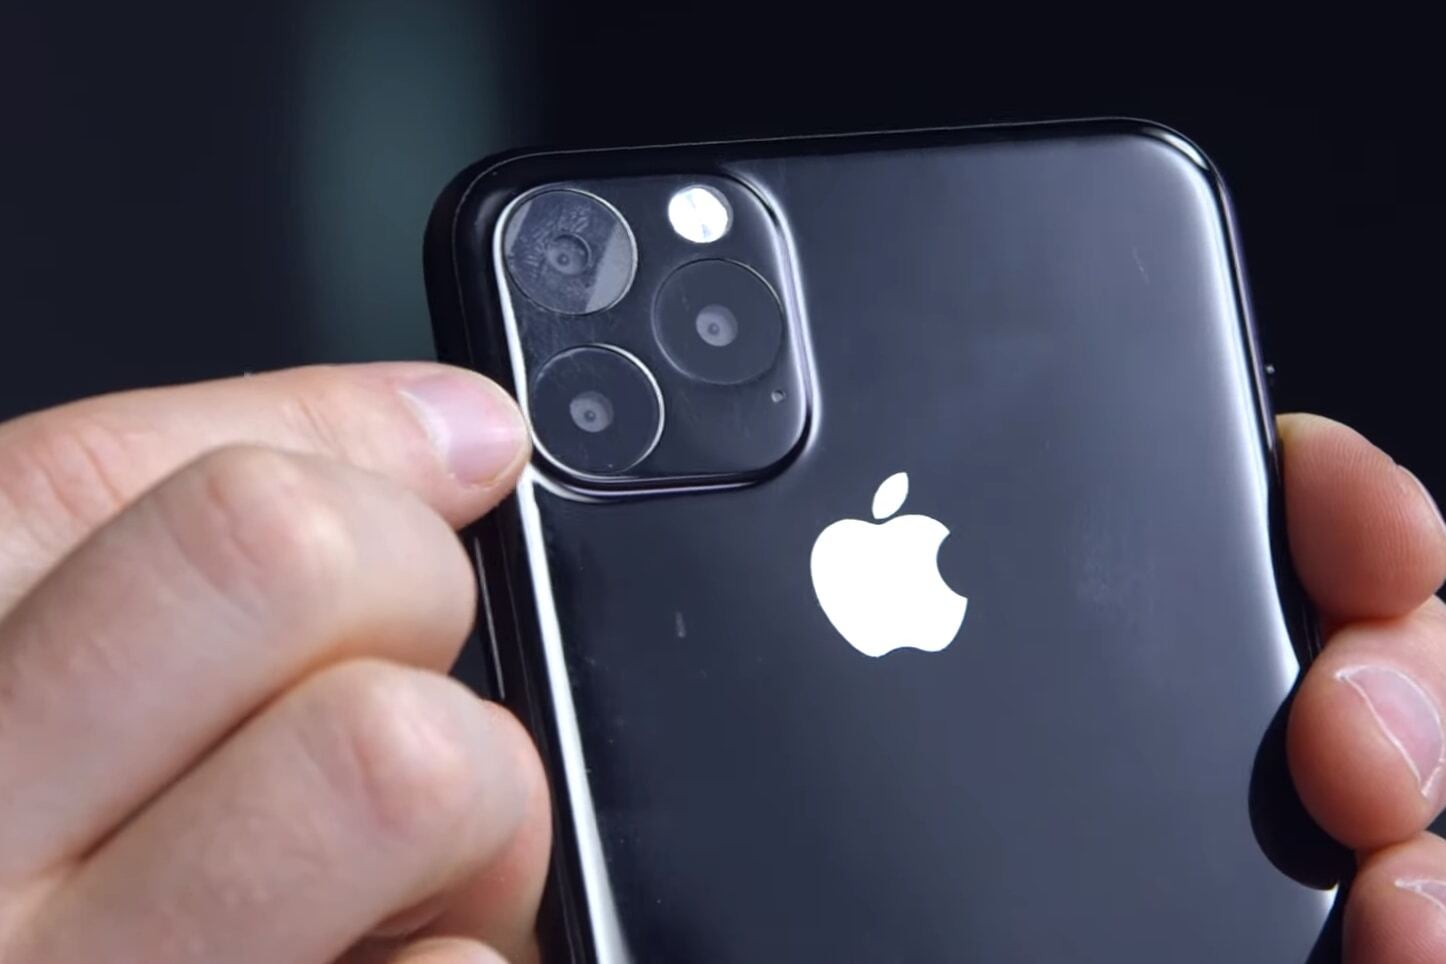 iPhone 11 Max dummy unit - The iPhone 11's release date may have been accidentally revealed